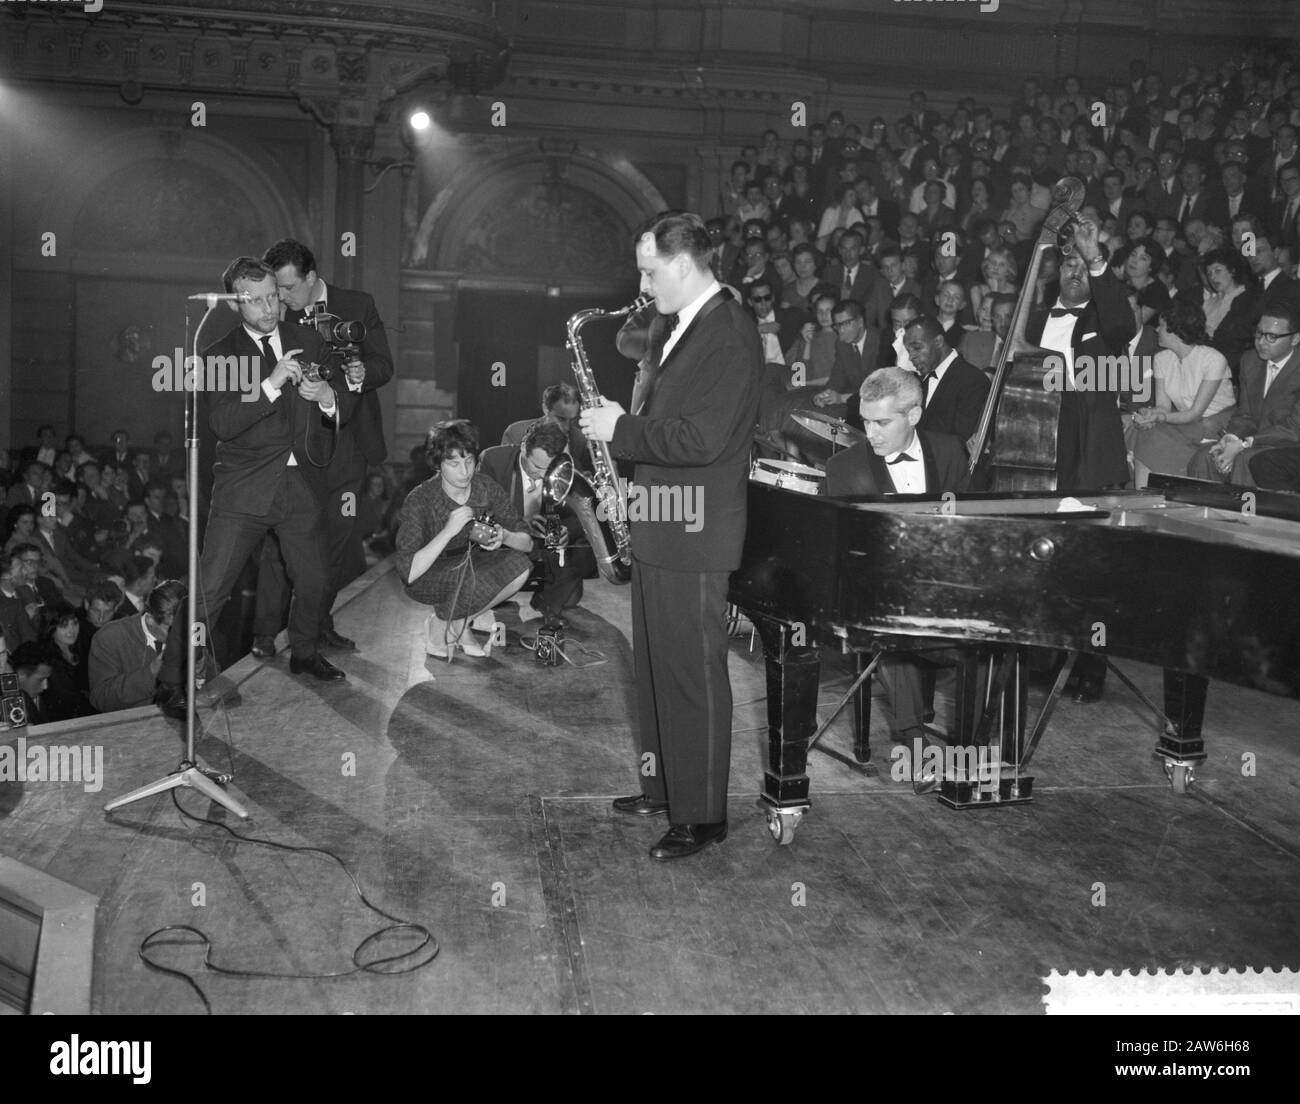 Performance of Jazz at the Philharmonic concert in the Harmonica. Stan Getz, tenor saxophone and Lou Levy, piano. Date: April 11, 1959 Location: Amsterdam, Noord-Holland Keywords: jazz, performances Person Name: Lou Levy, Stan Getz Stock Photo